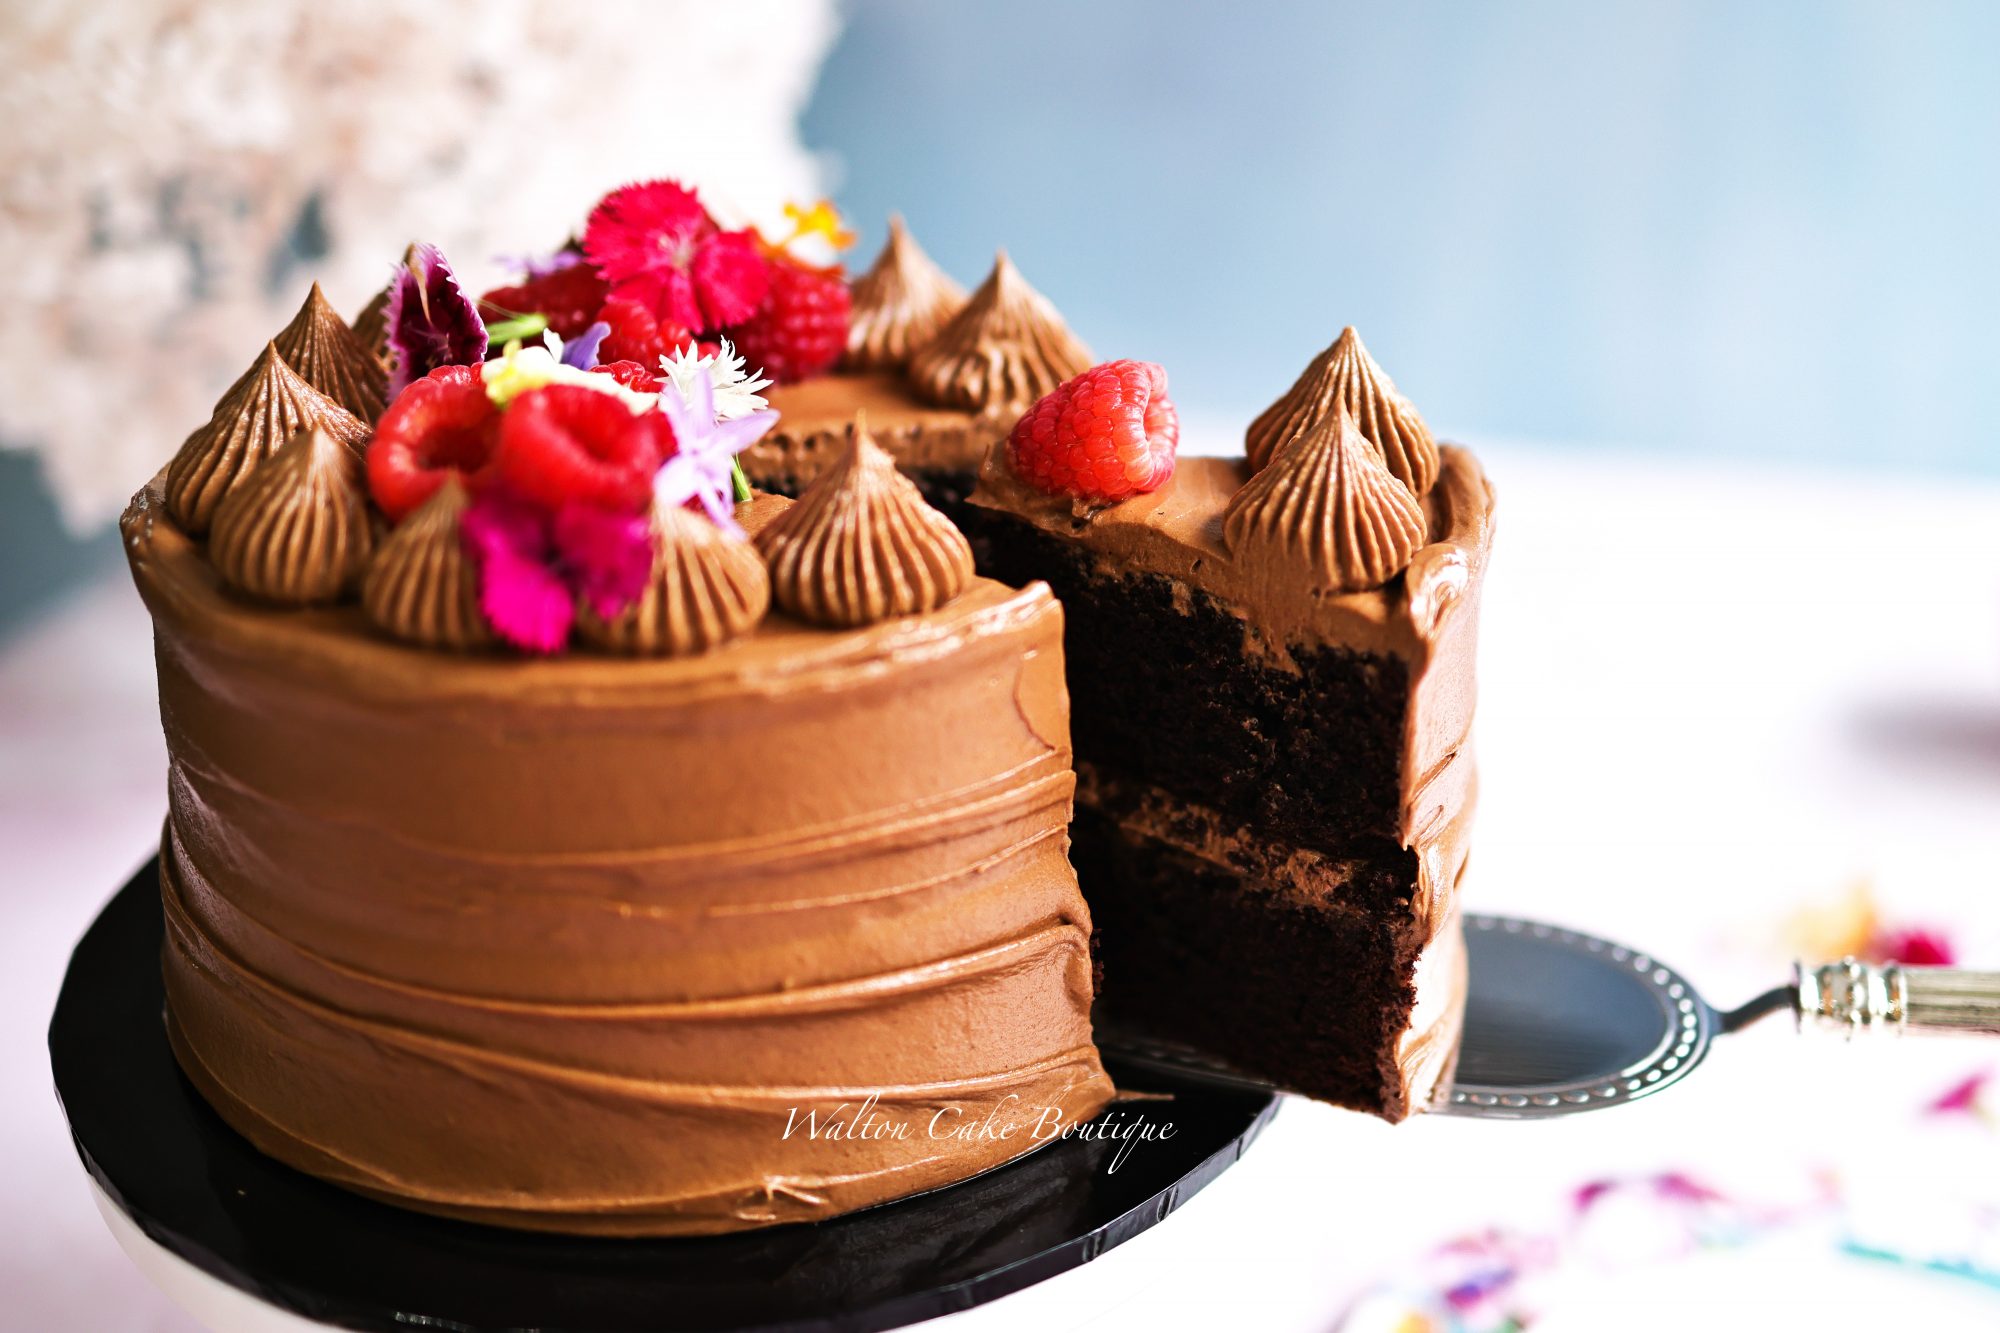 How to make an easy and delicious Chocolate Cake recipe